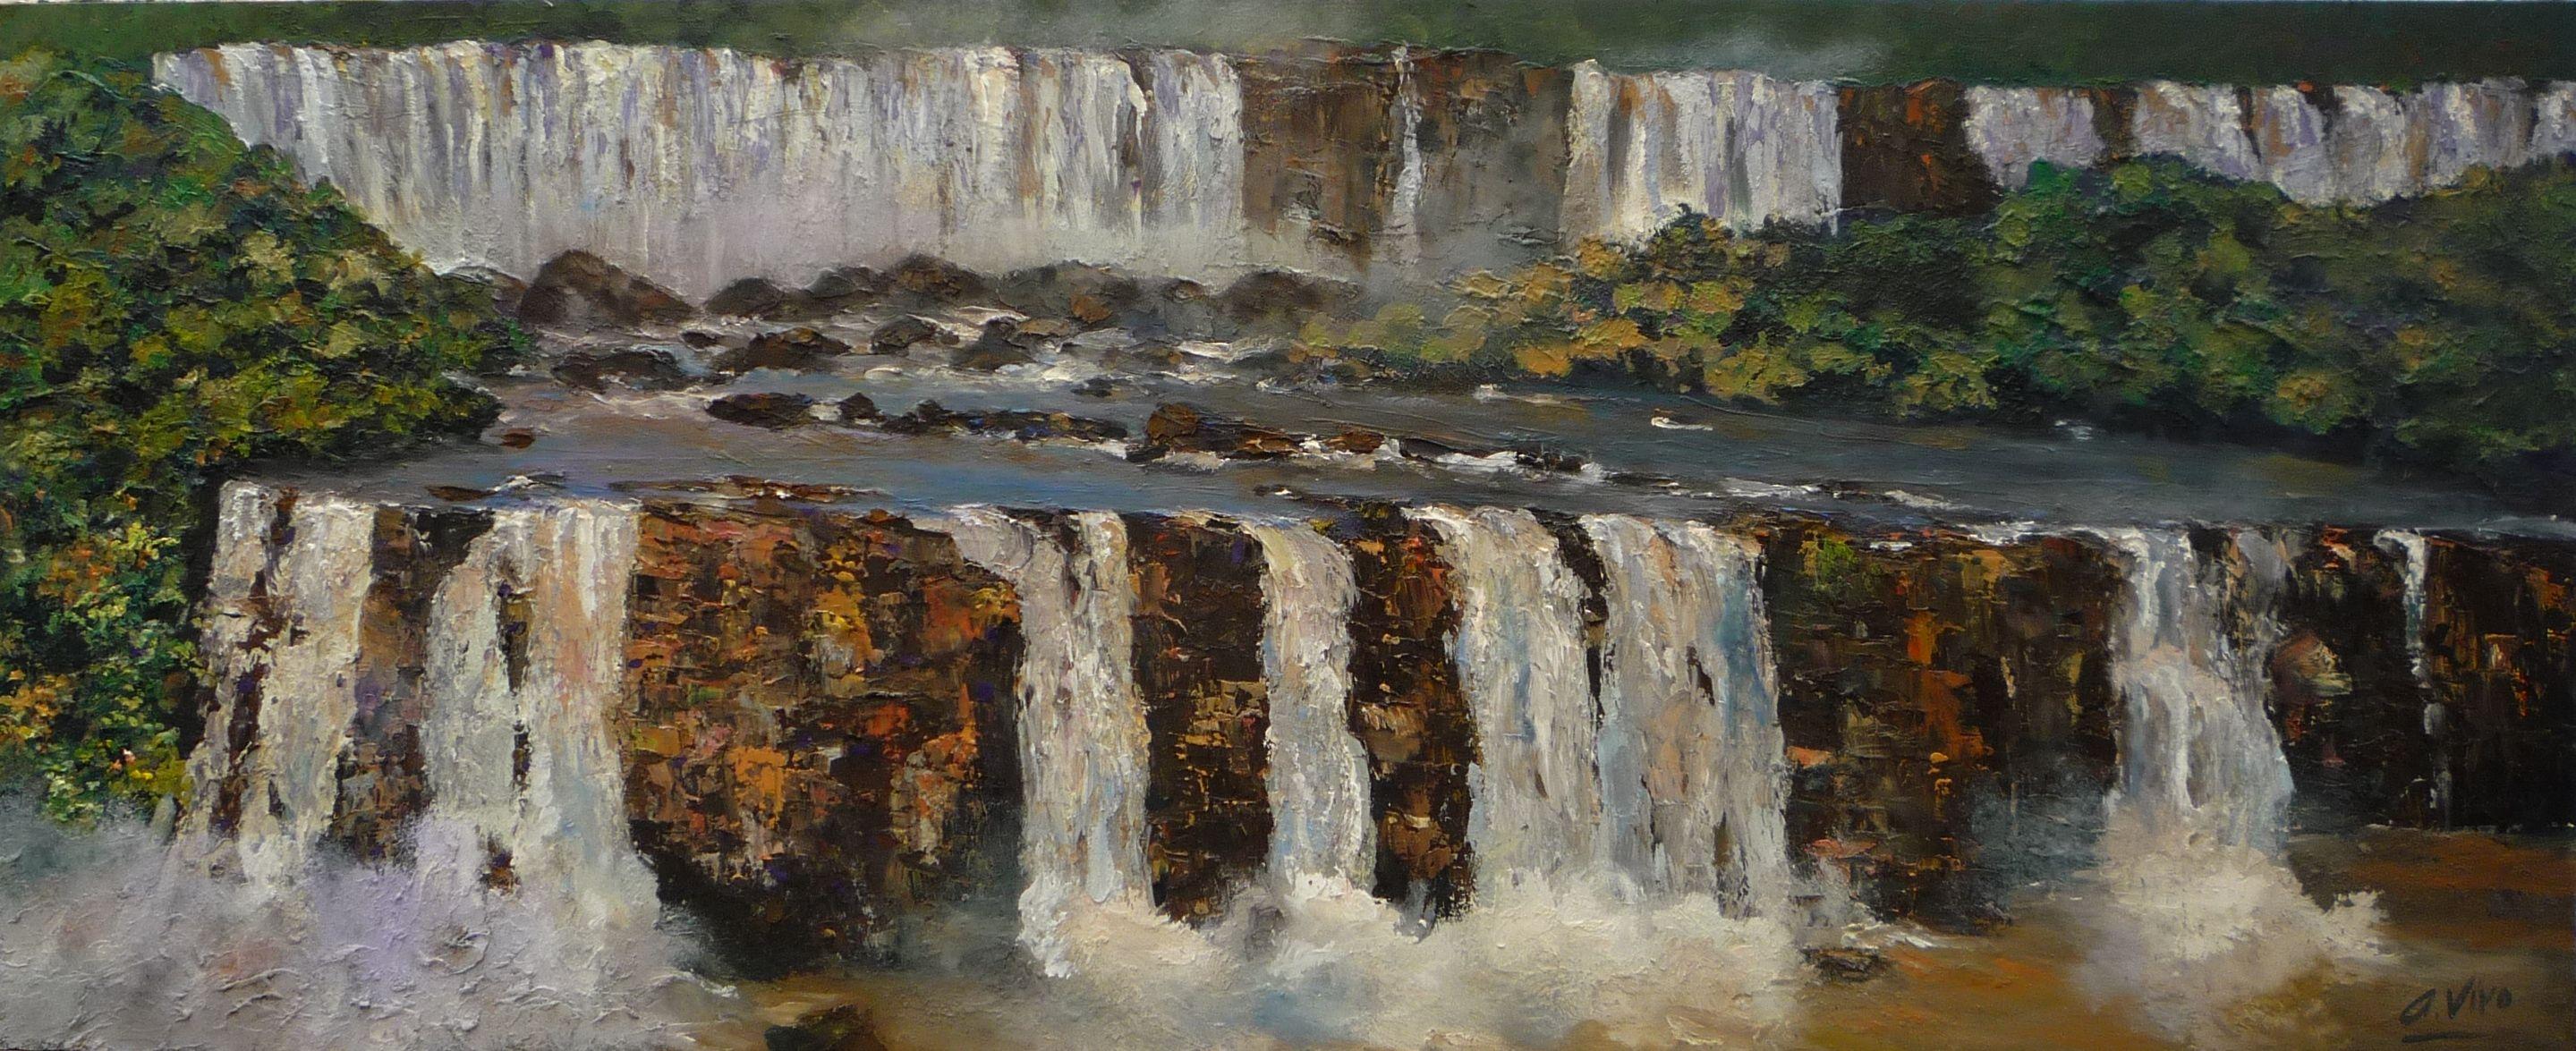 Andres Vivo Landscape Painting - 3400 Seven water jumps at IguazÃº, Painting, Oil on MDF Panel